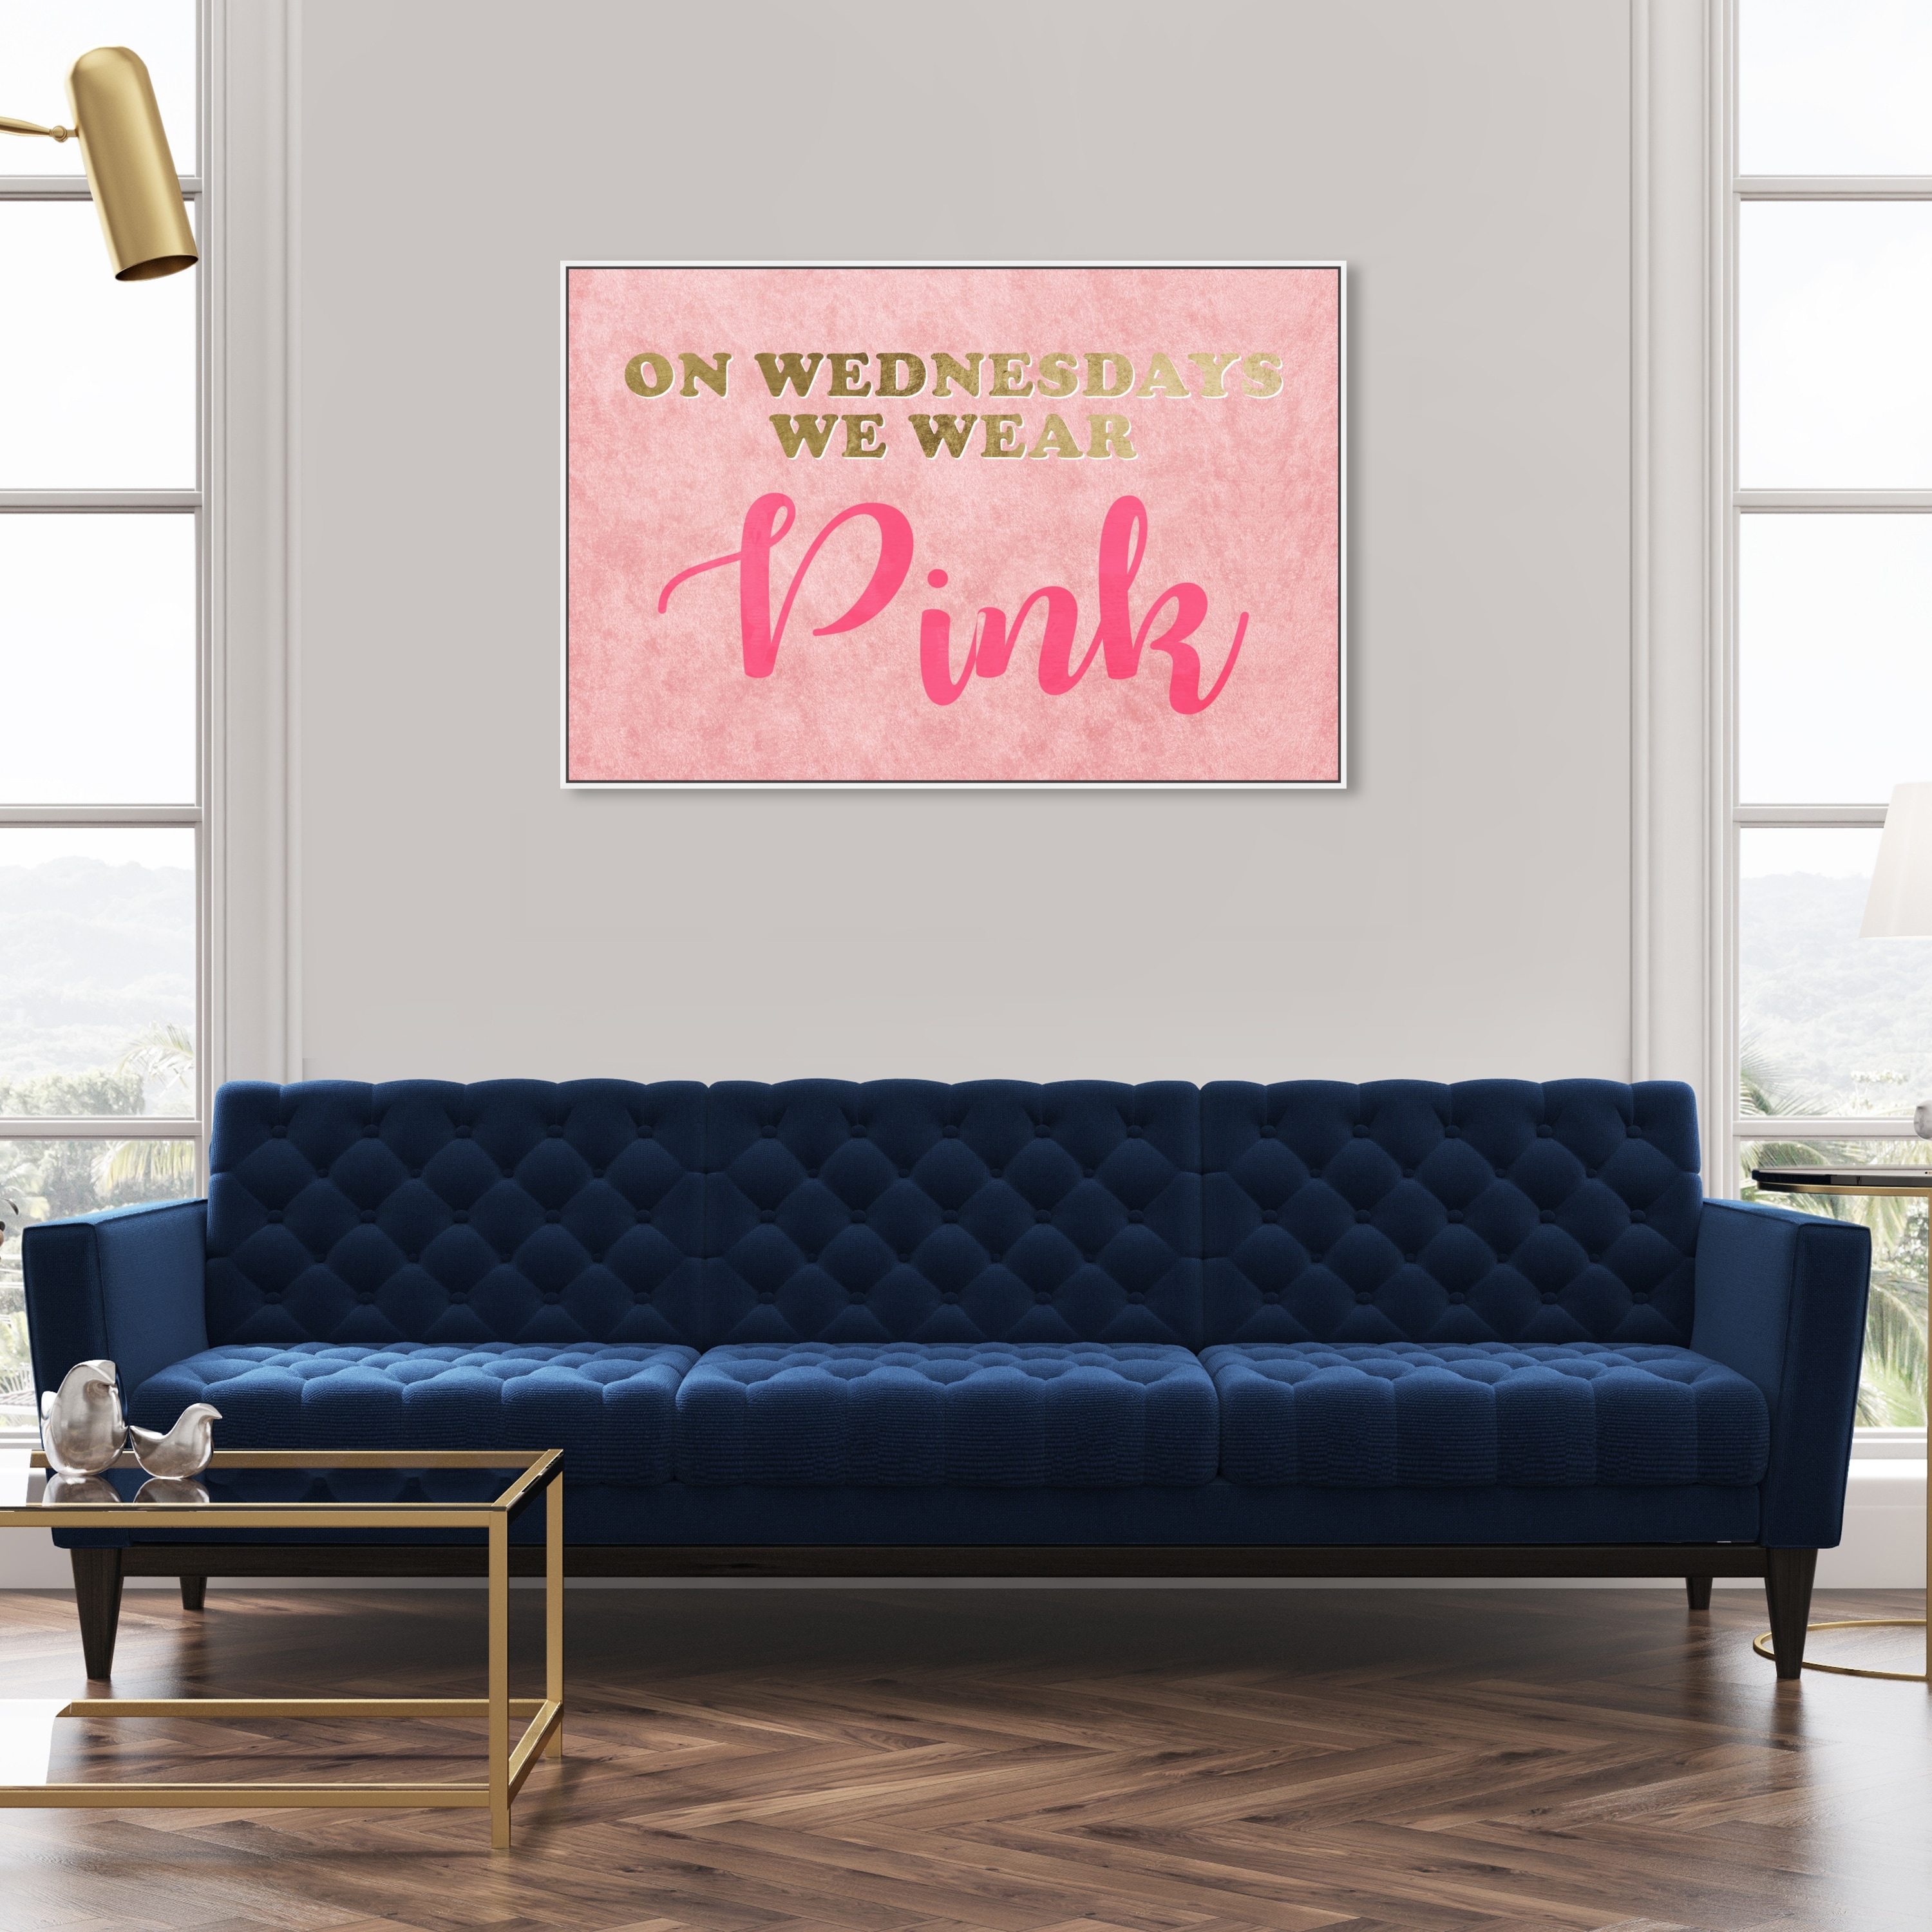 Oliver Gal Fashion and Glam Wall Art Canvas Prints 'Fashion Stacked Books  Pink' Books - Pink, Gold - Bed Bath & Beyond - 30765022